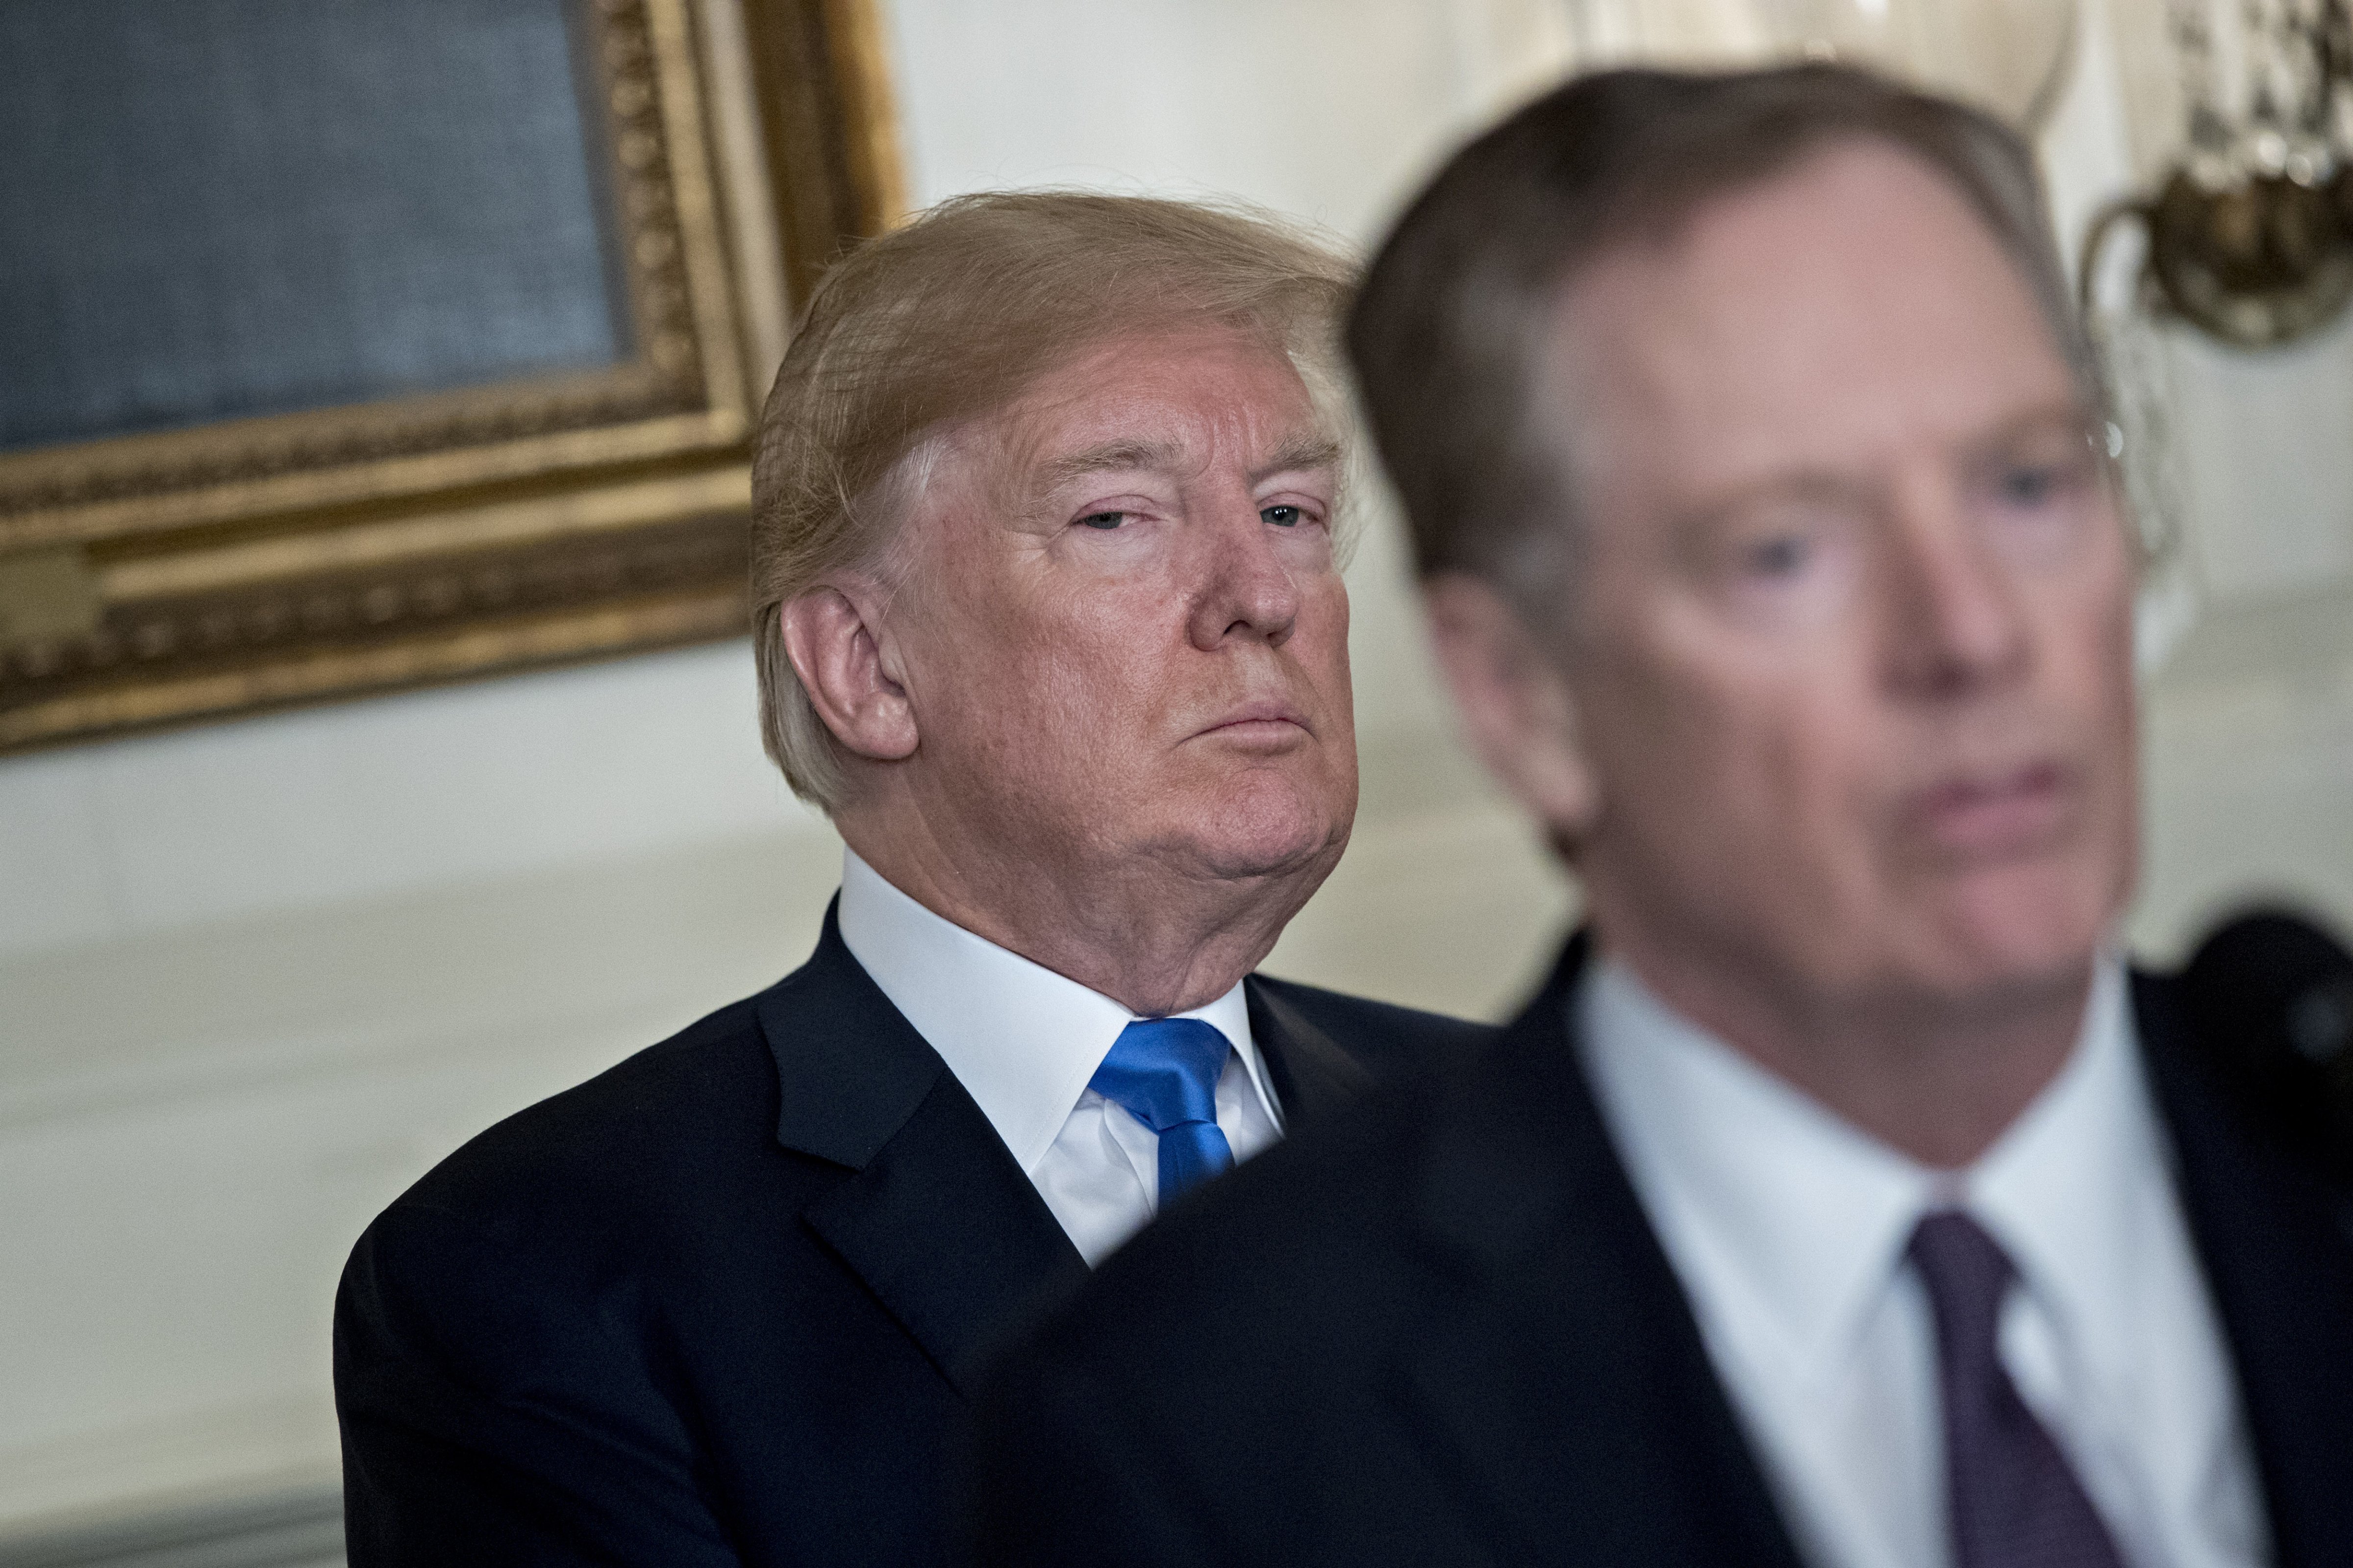 U.S. President Donald Trump listens as Robert Lighthizer, U.S. trade representative, right, speaks before Trump signs a presidential memorandum targeting China's economic aggression in the Diplomatic Room of the White House in Washington, D.C. on March 22 (Bloomberg—Bloomberg via Getty Images)